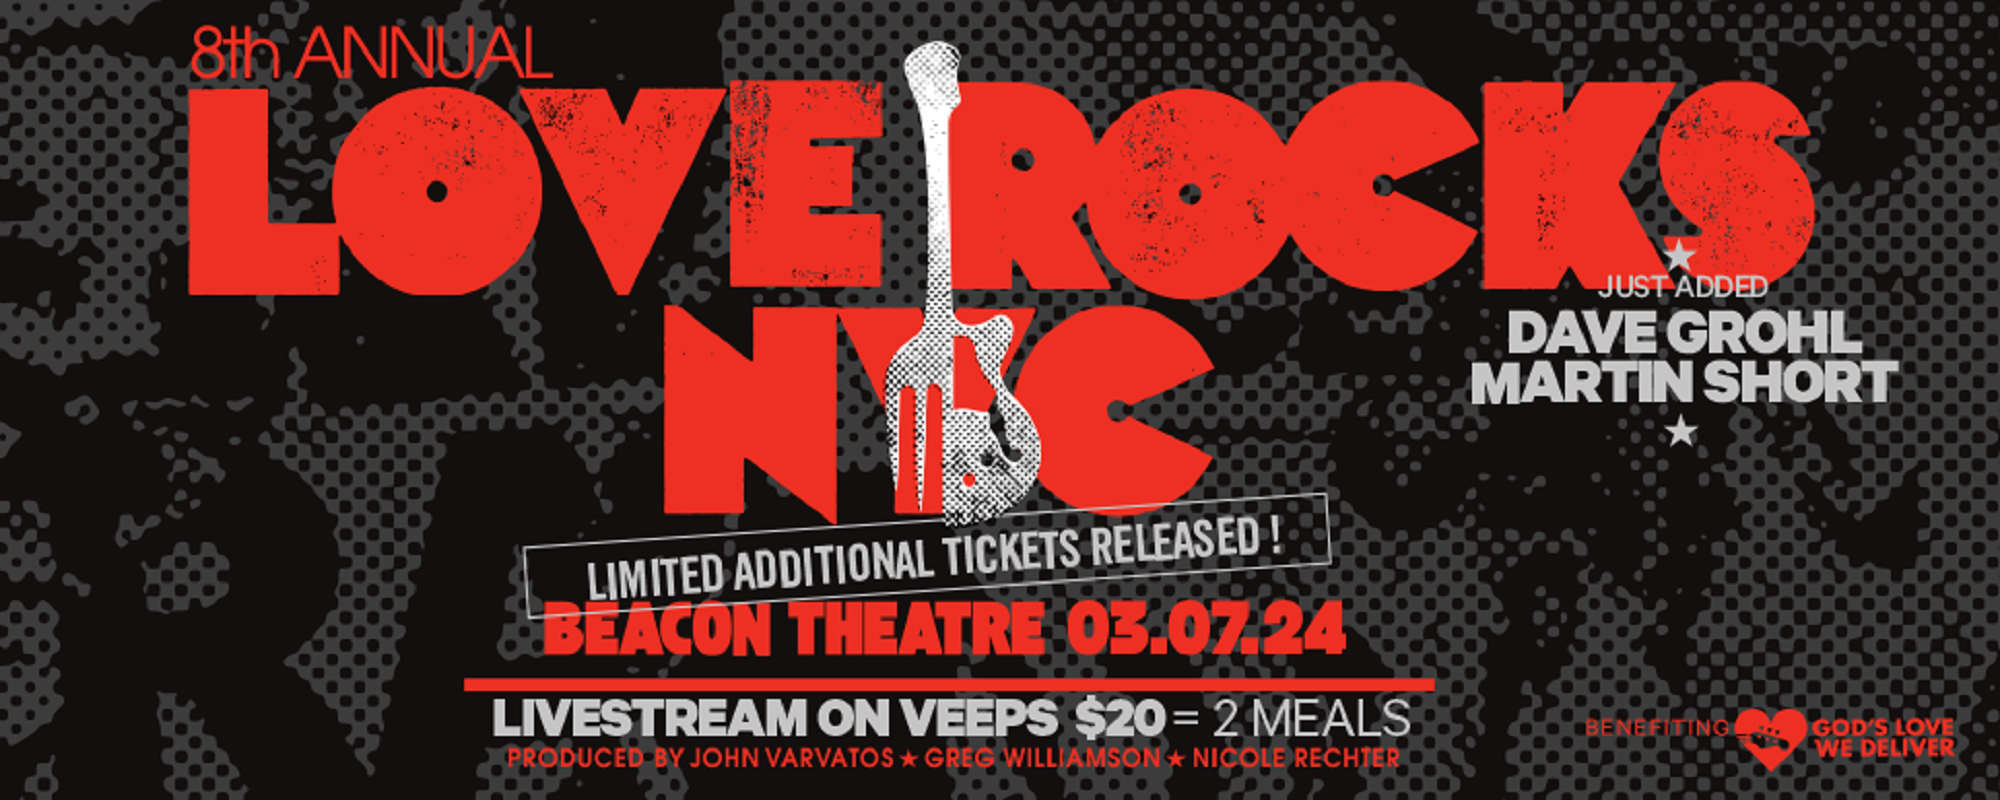 Love Rocks NYC 2024 Benefit Concert with Dave Grohl, The Black Keys, Don Felder & More Stars: How to Watch